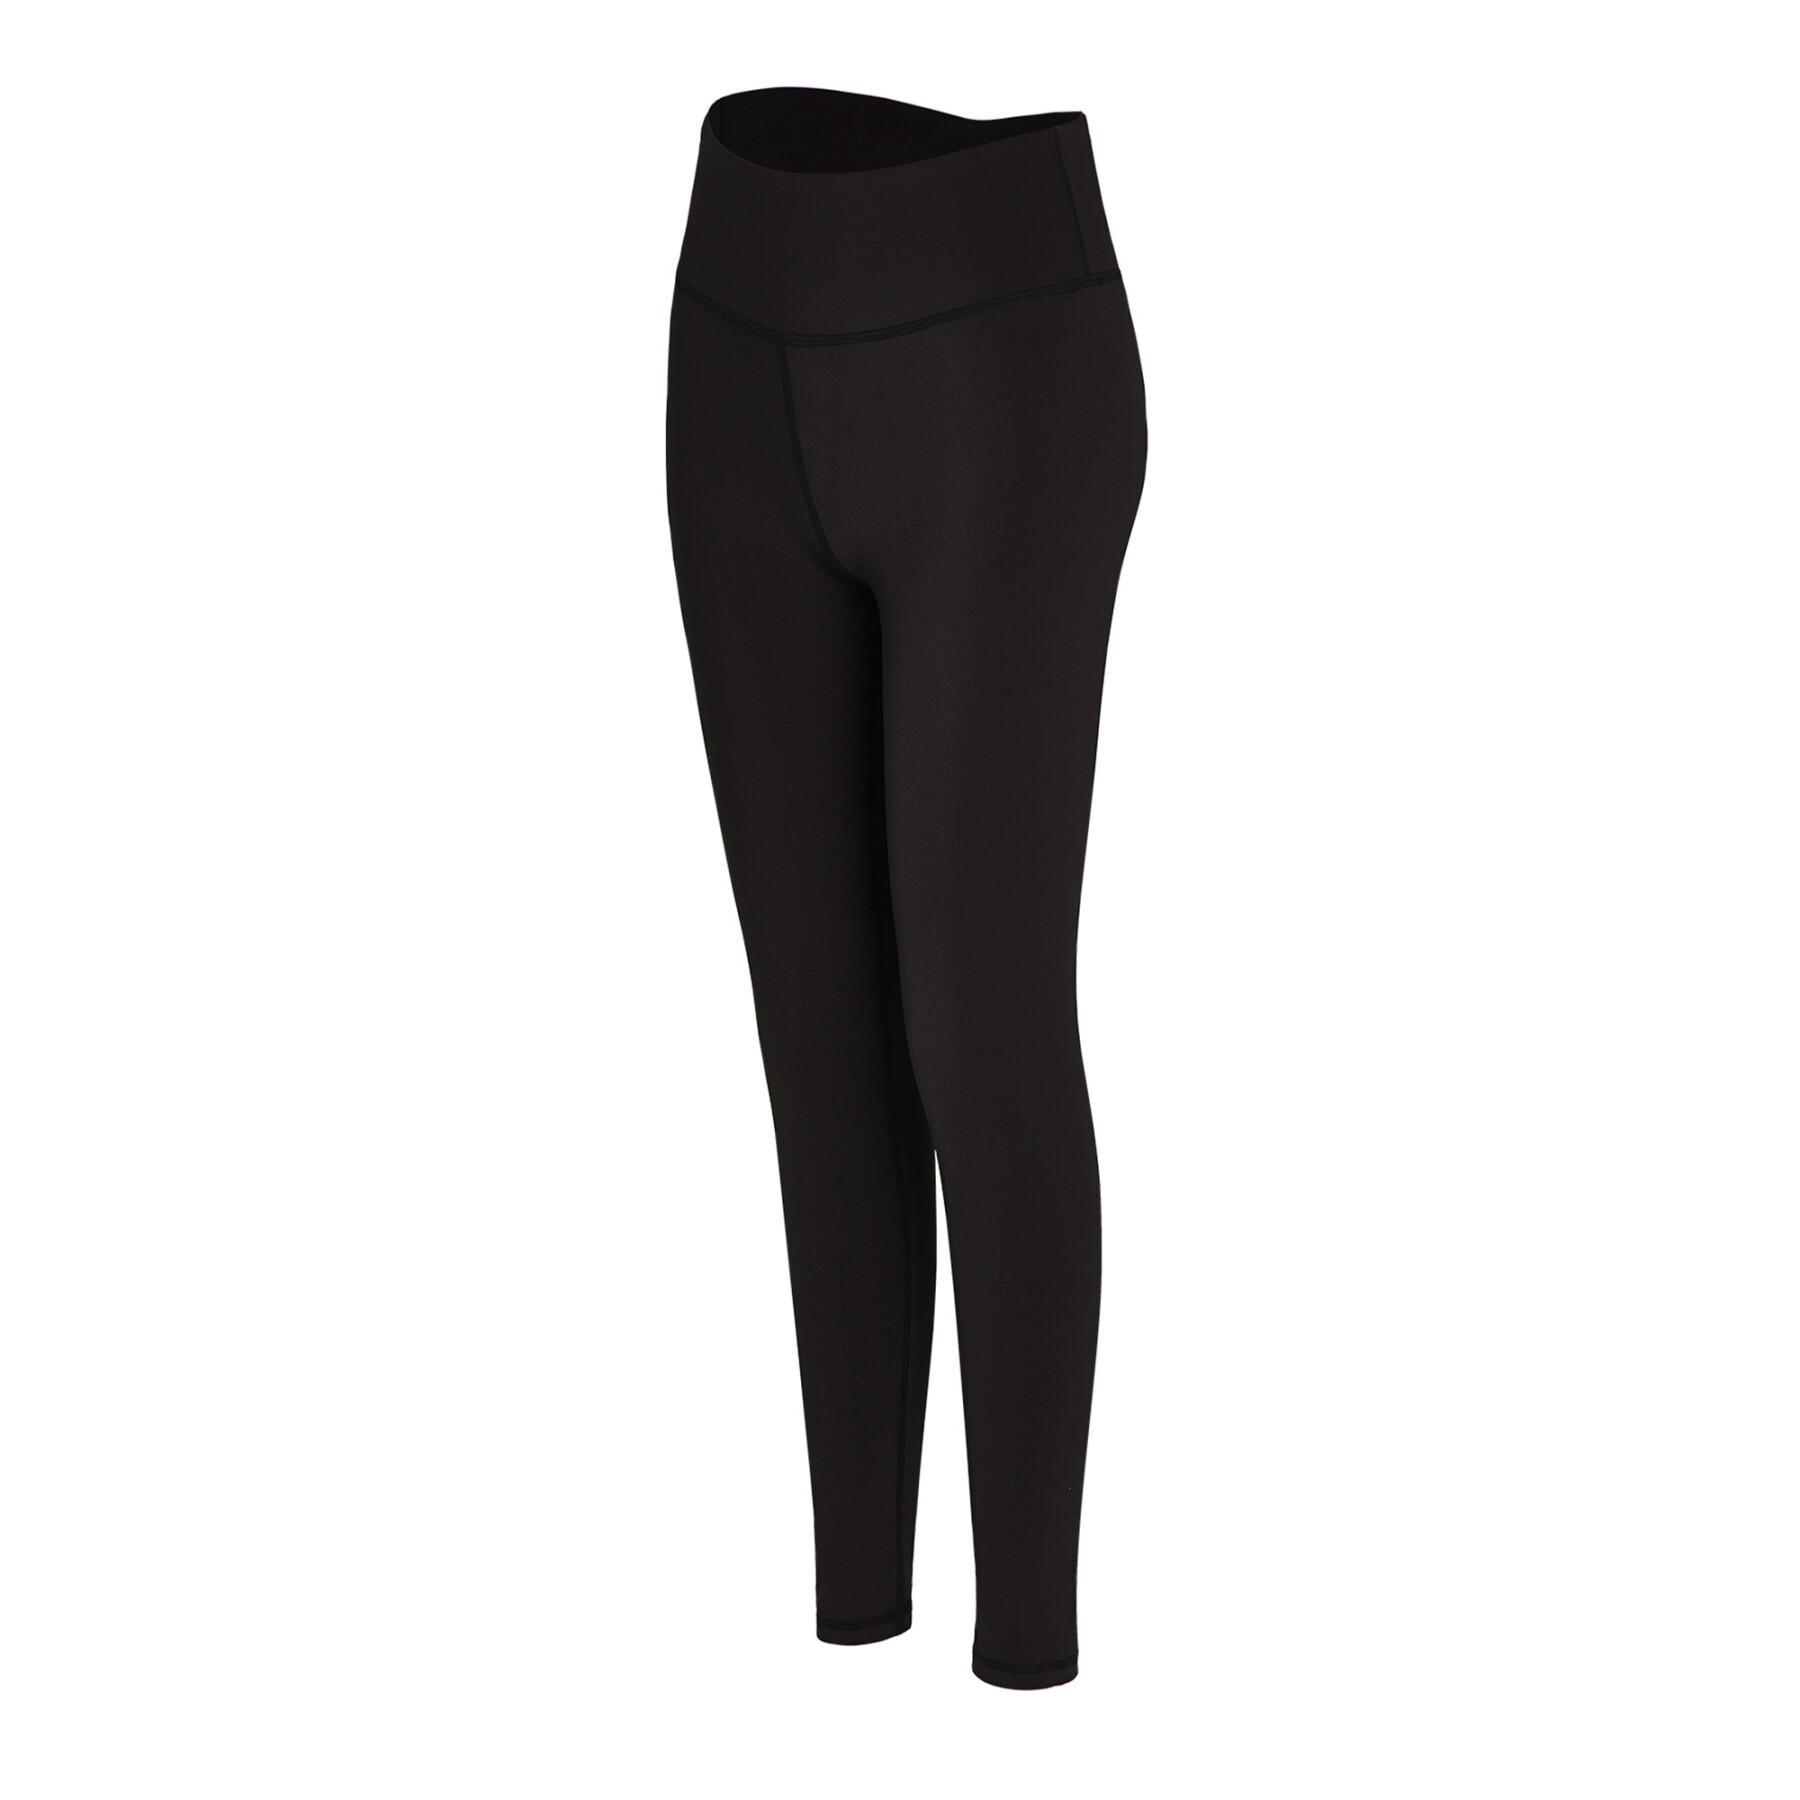 Women's high-waisted leggings Yeaz Mission